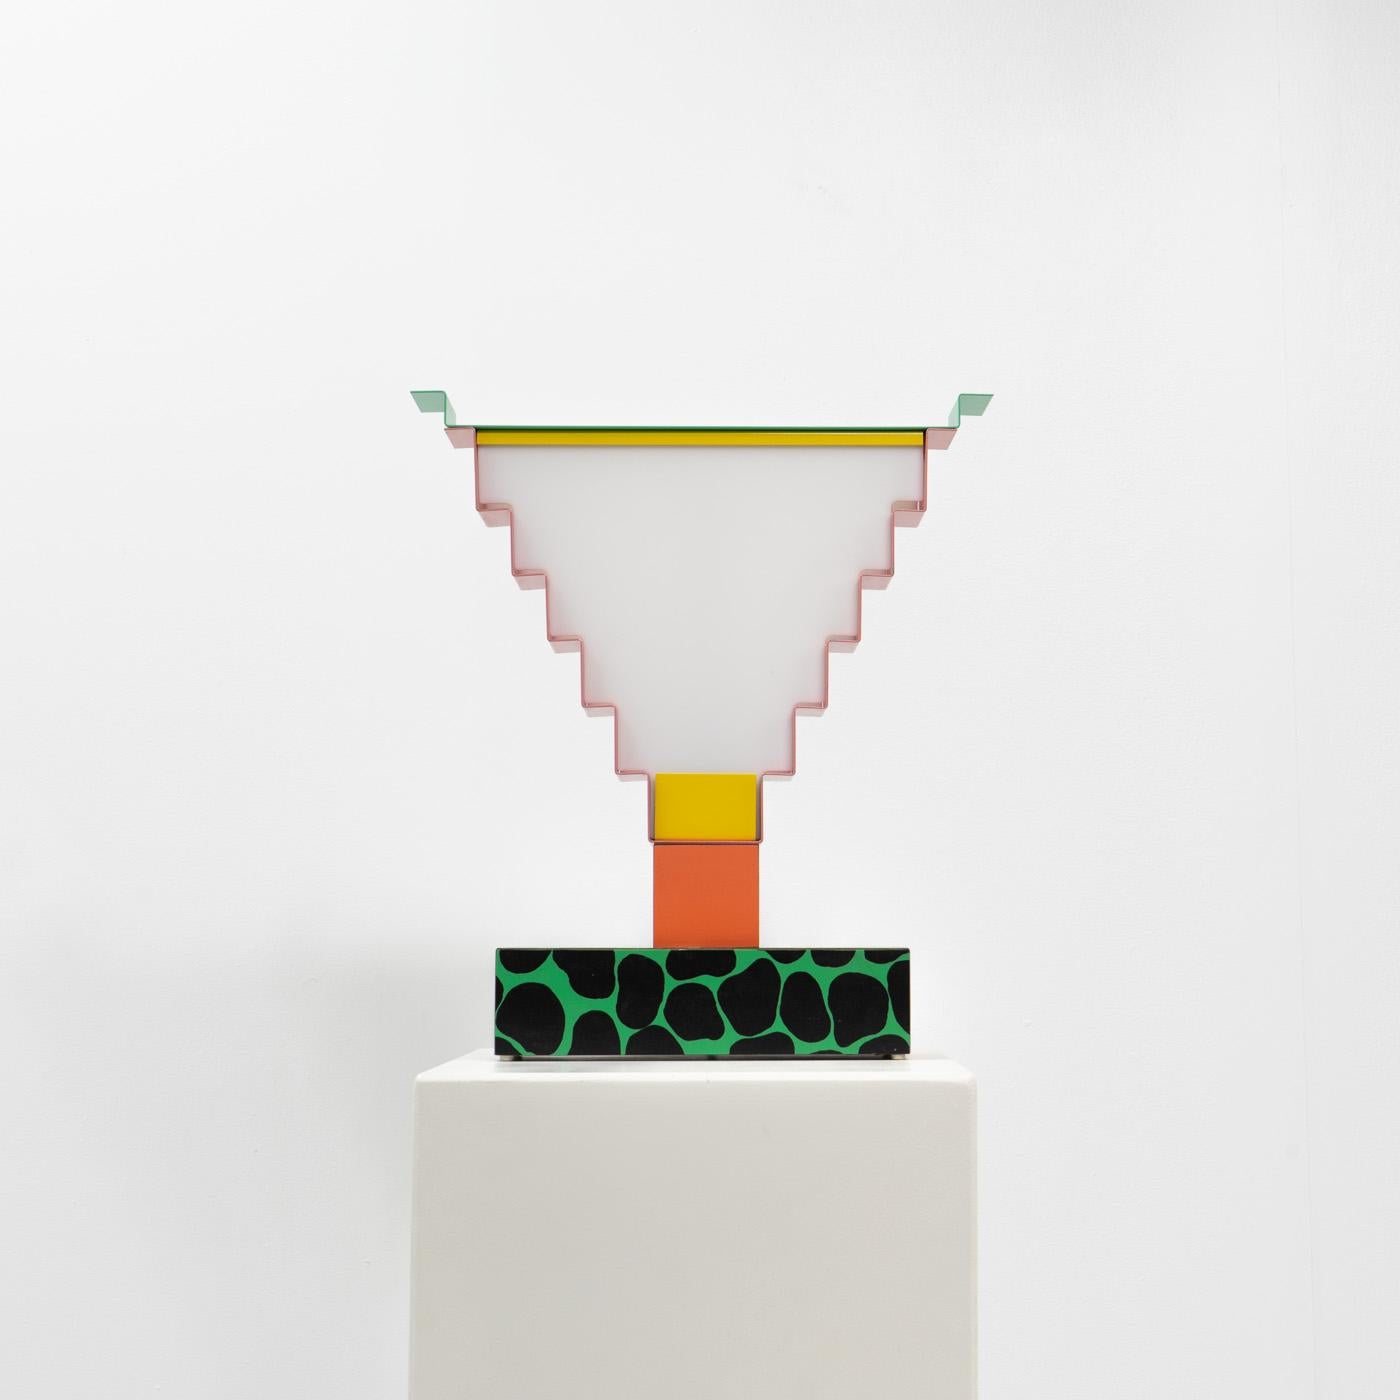 Table lamp by Nathalie du Pasquier and George Sowden, for the series “Objects for the Electronic Age”.

Nathalie du Pasquier & George Sowden, founding members of the Memphis-Milano group collaborated together to create a set of limited edition,